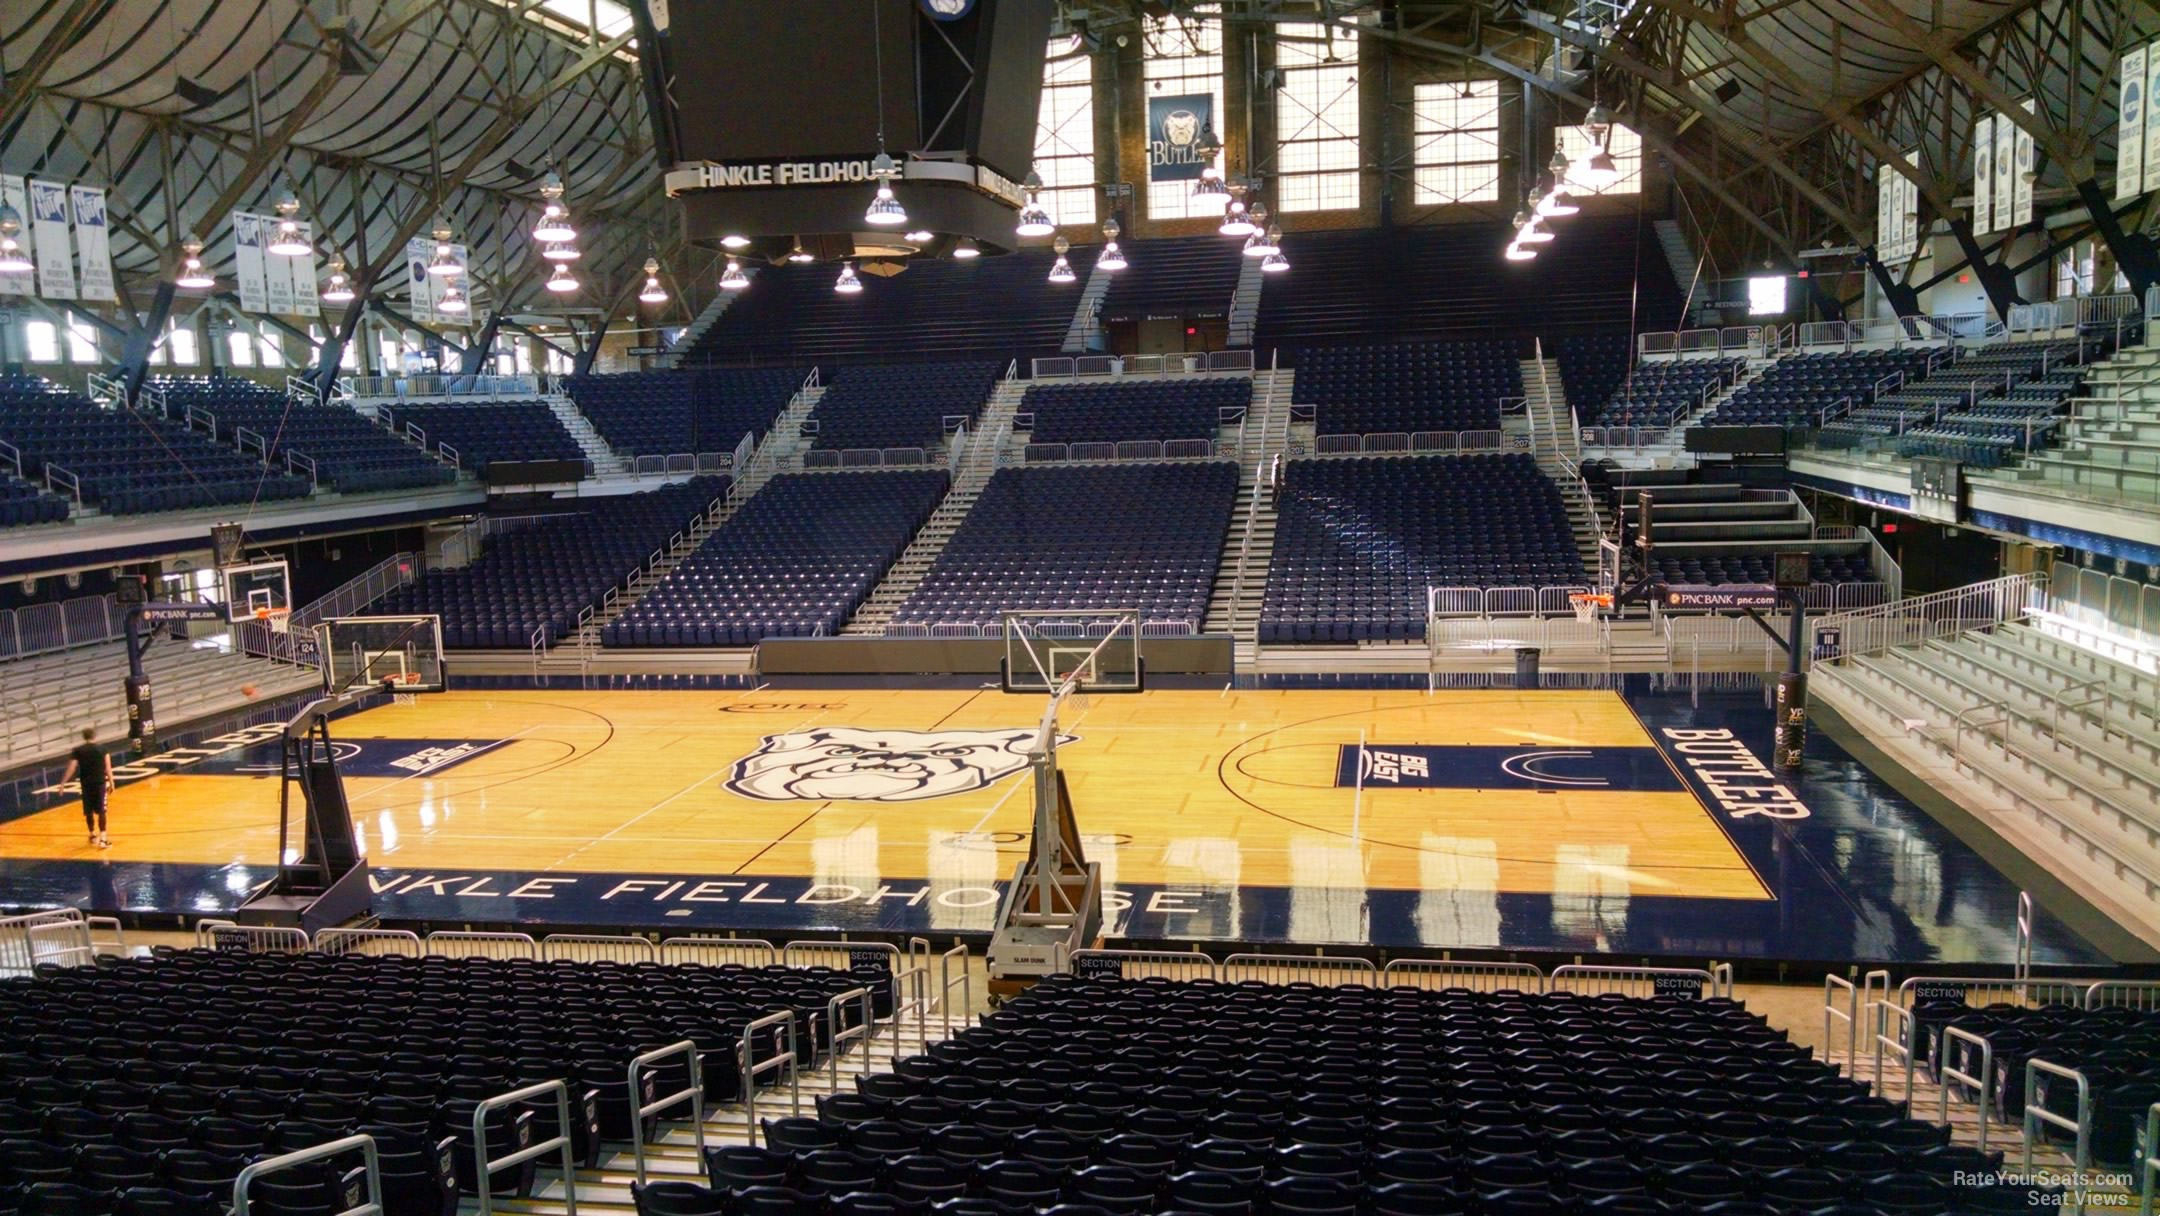 section 217, row 3 seat view  - hinkle fieldhouse